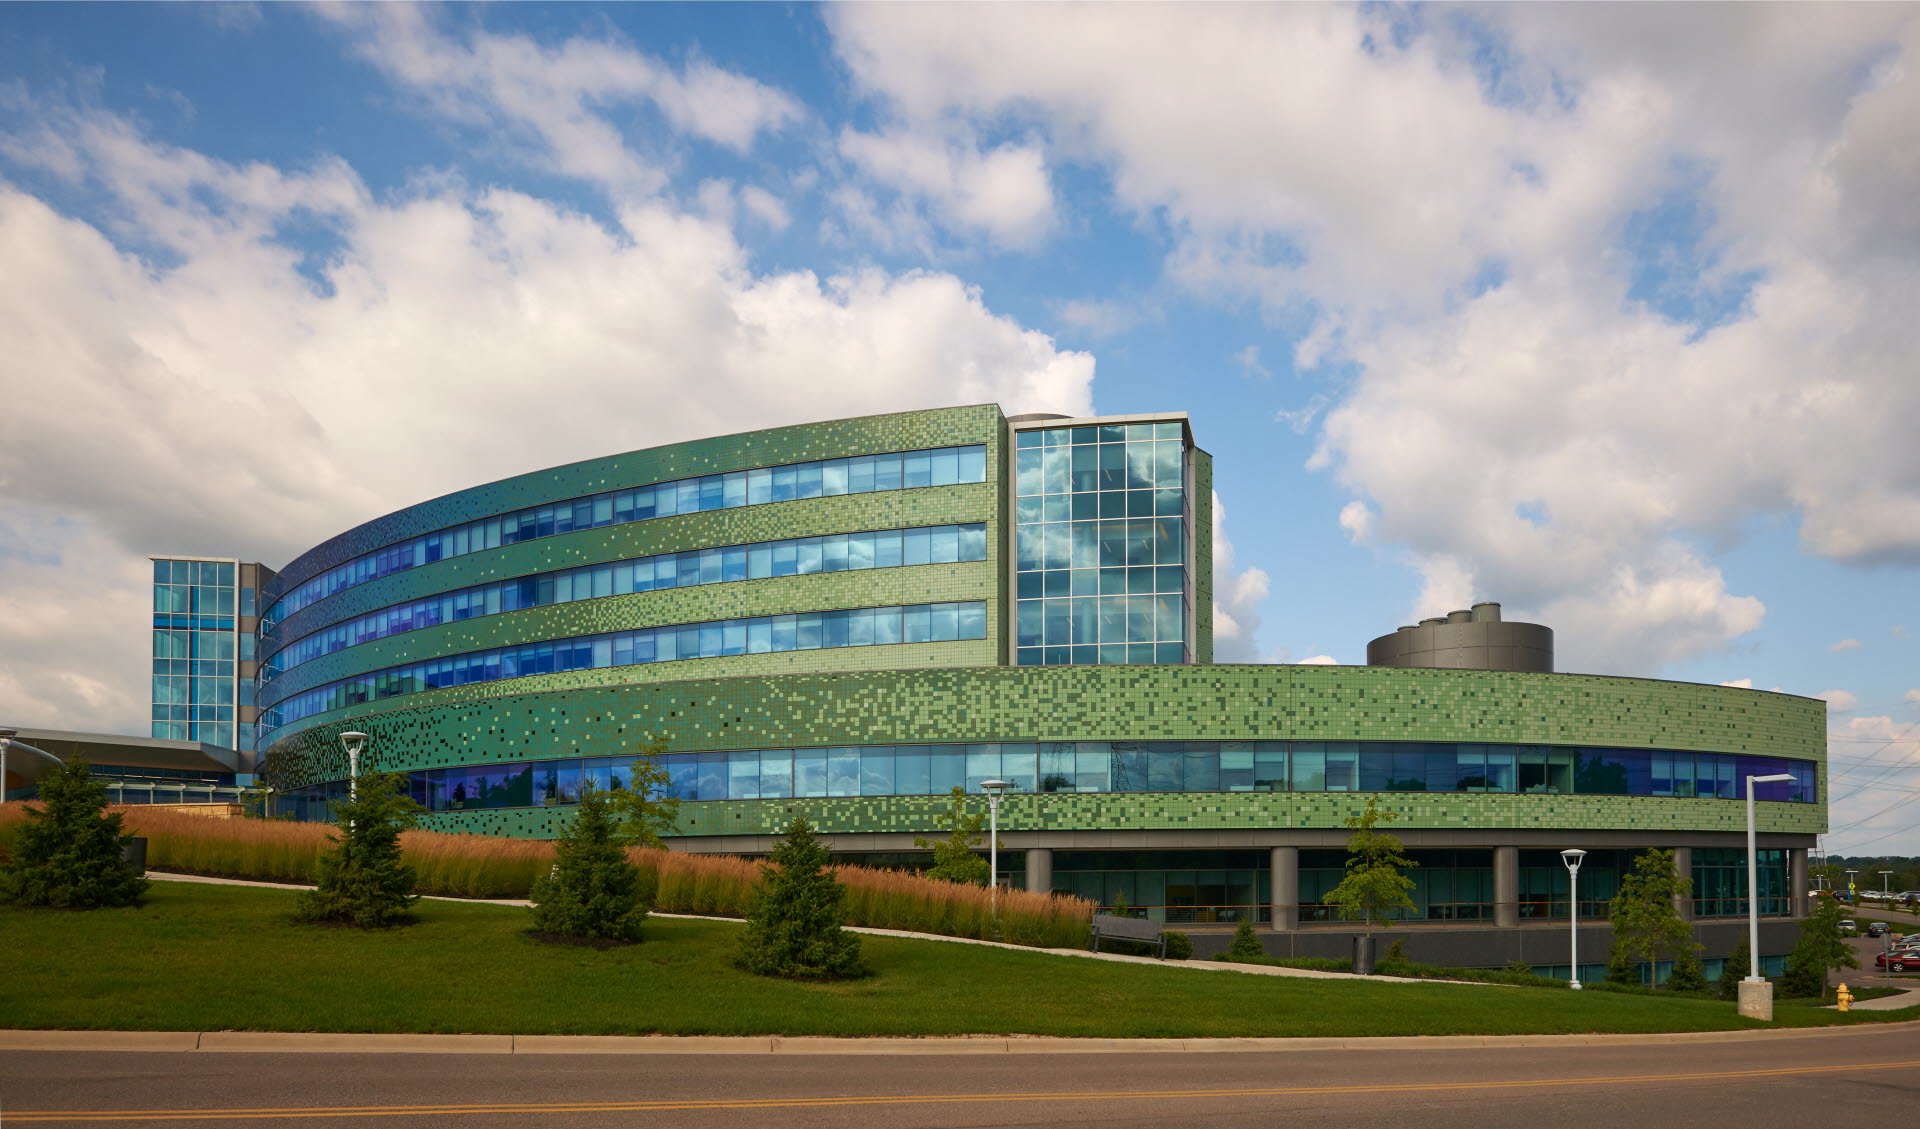 wide view of a precast concrete building made with green tiles and lots of windows.